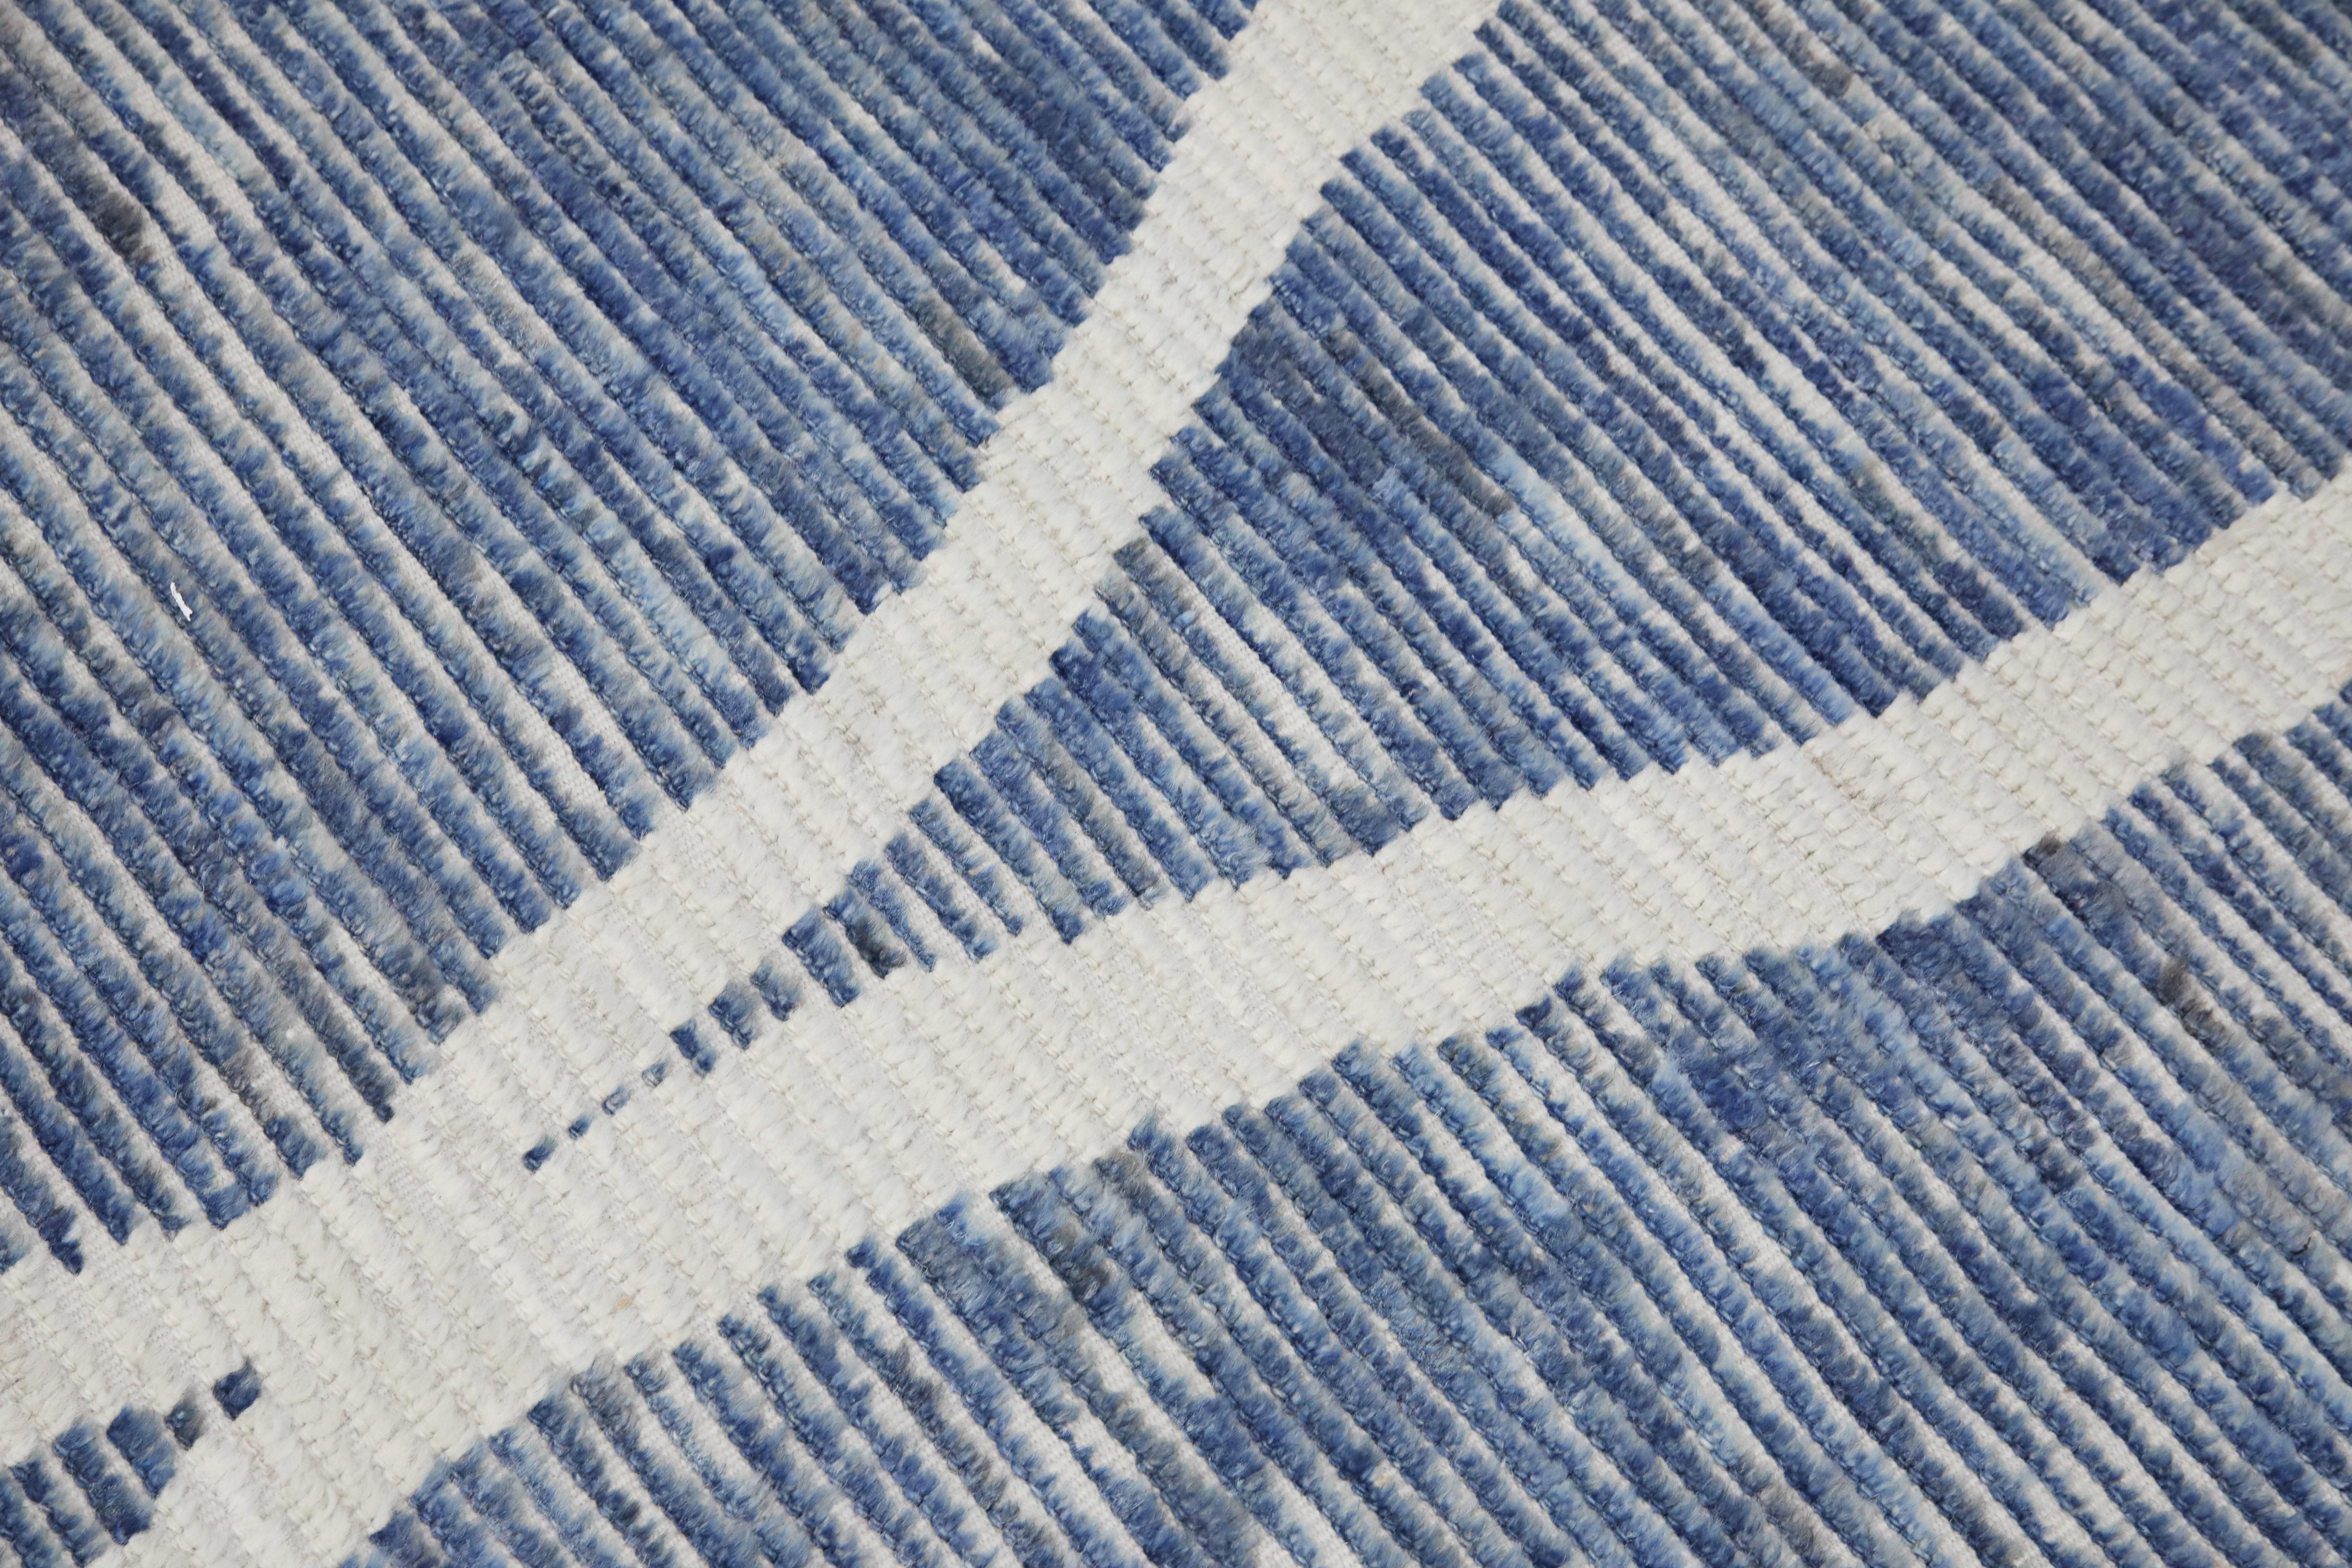 Introducing our exquisite handwoven wool modern Moroccan-style rug, a stunning blend of traditional craftsmanship and contemporary design. Measuring 9'9